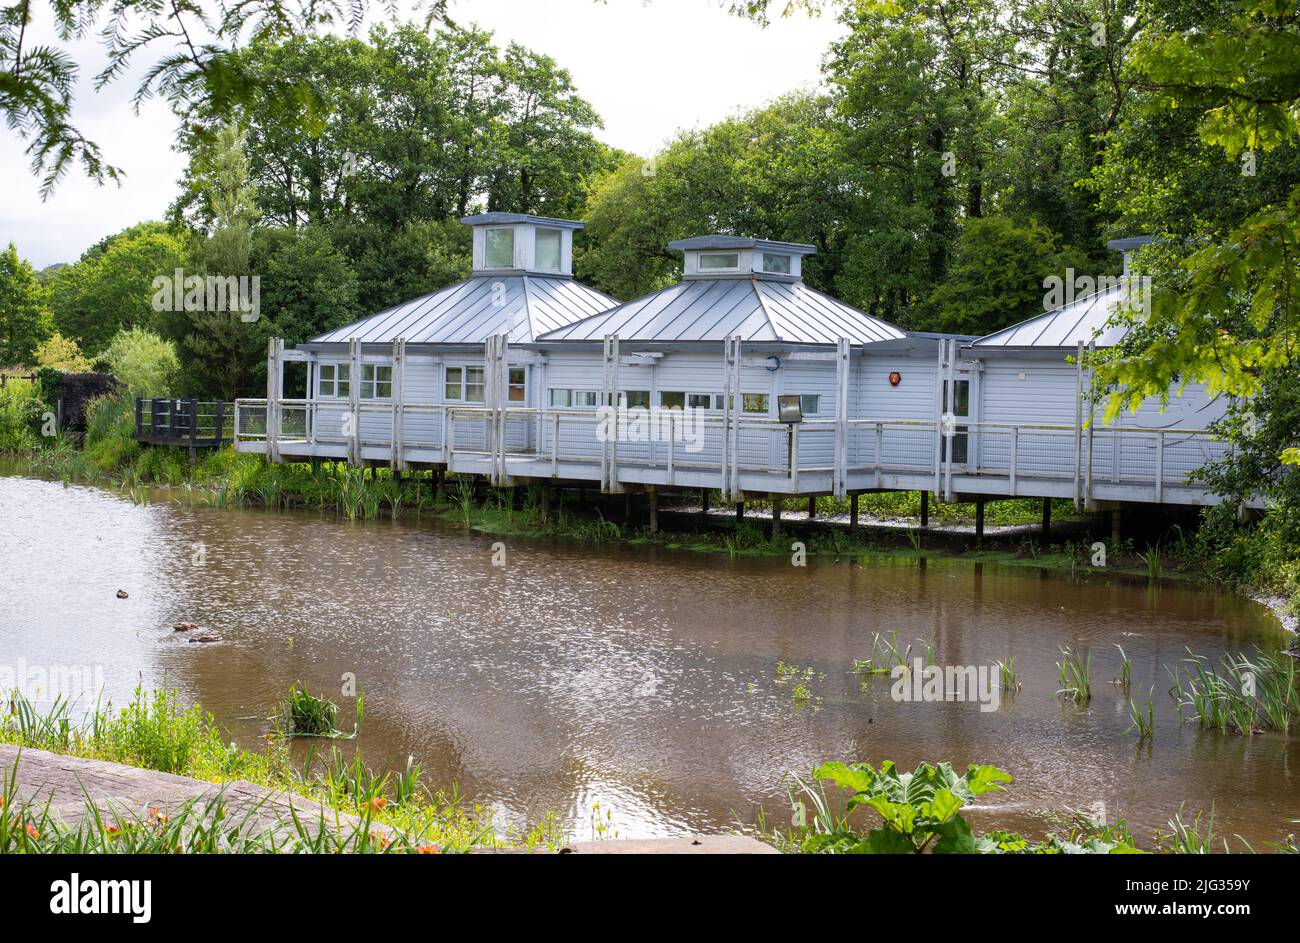 Photo taken at the National Botanic Garden Wales in July 2022 showing the aquatic plant house on stilts on the far side of the pond. Stock Photo